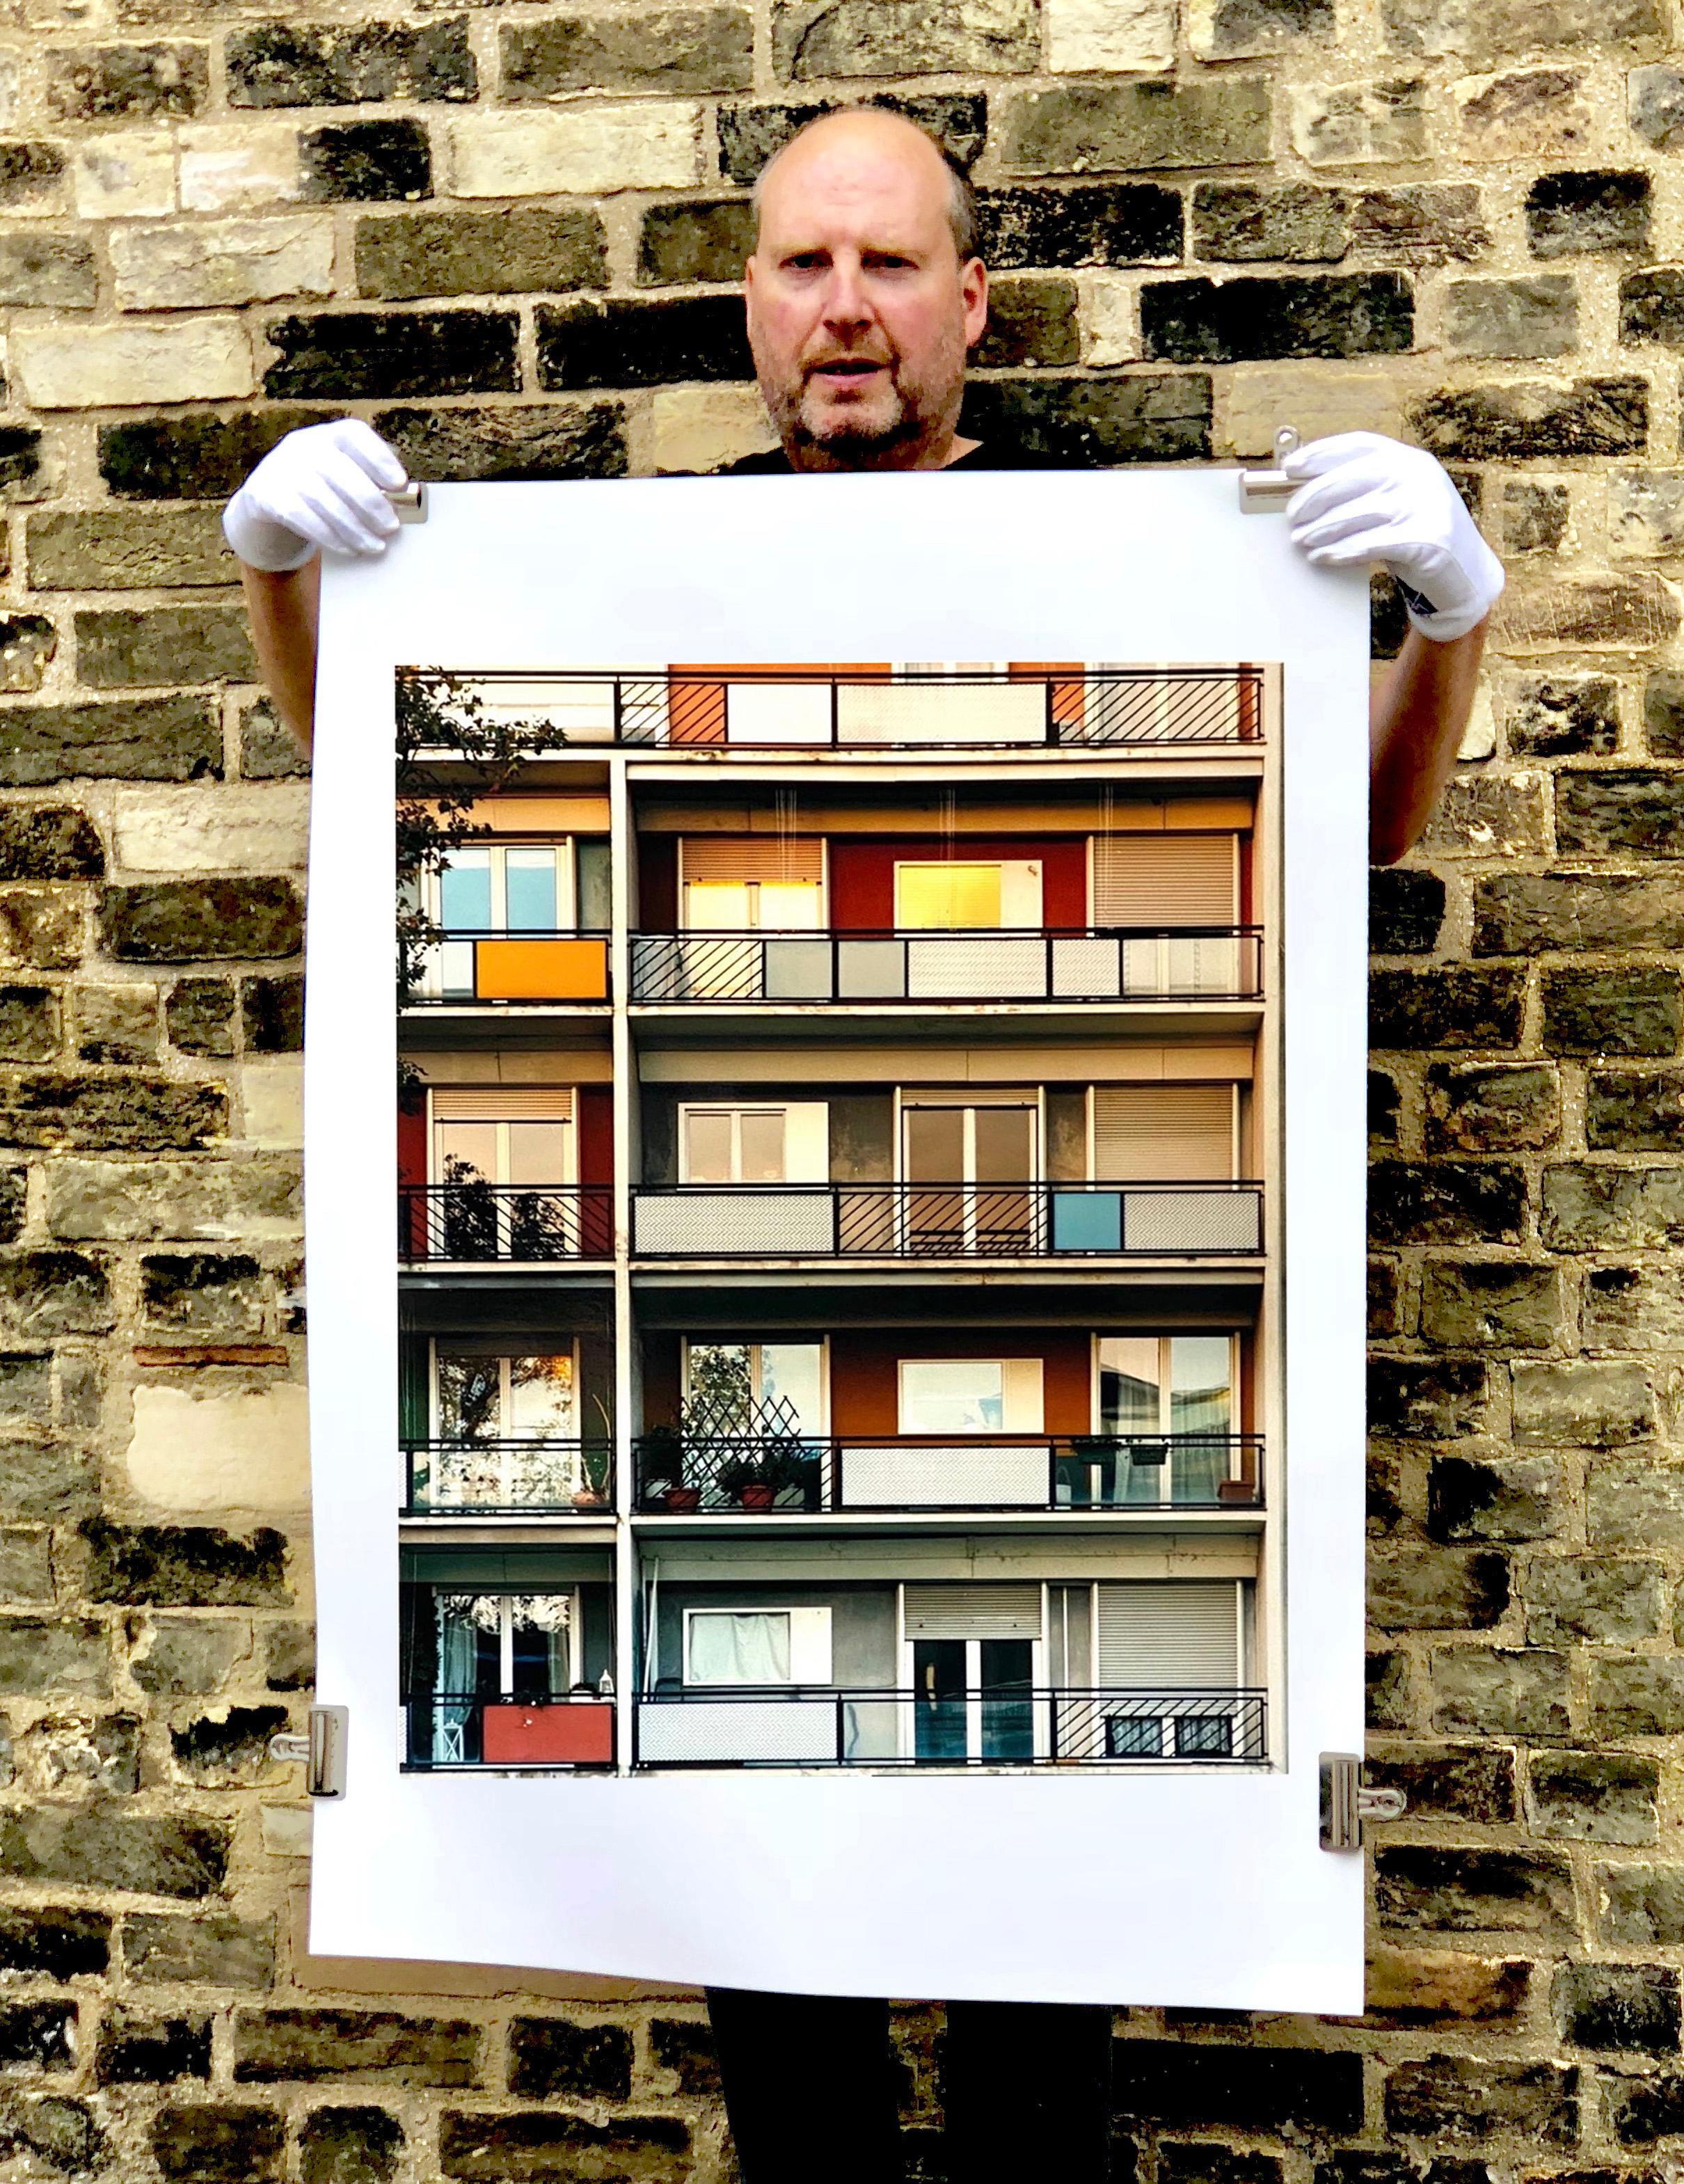 49 Via Dezza at Sunset, Milan - Conceptual Architectural Color Photography - Print by Richard Heeps